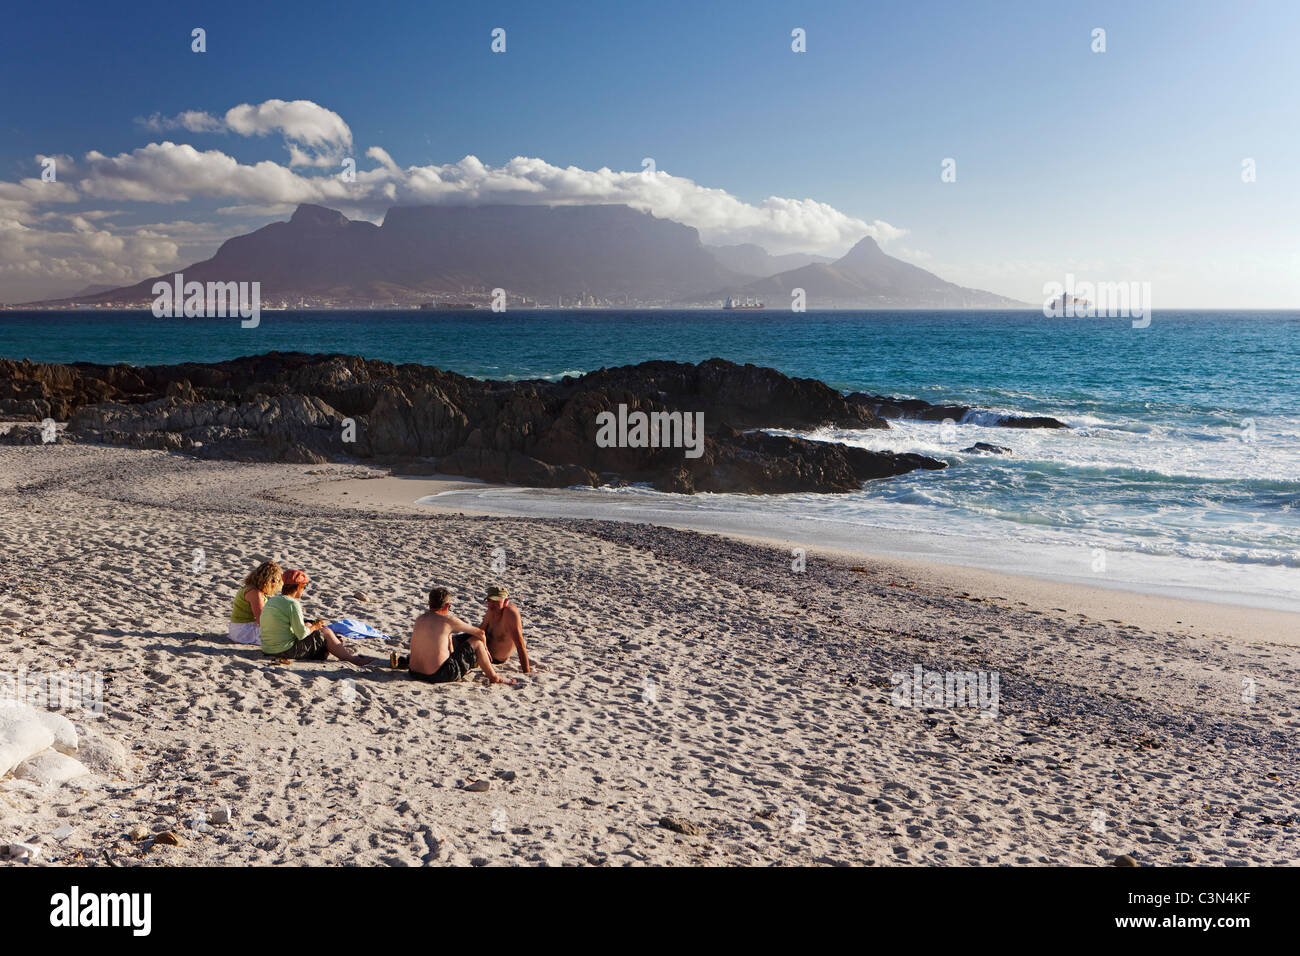 South Africa, Cape Town, Blouberg beach. People relaxing. Background: Table mountain. Stock Photo